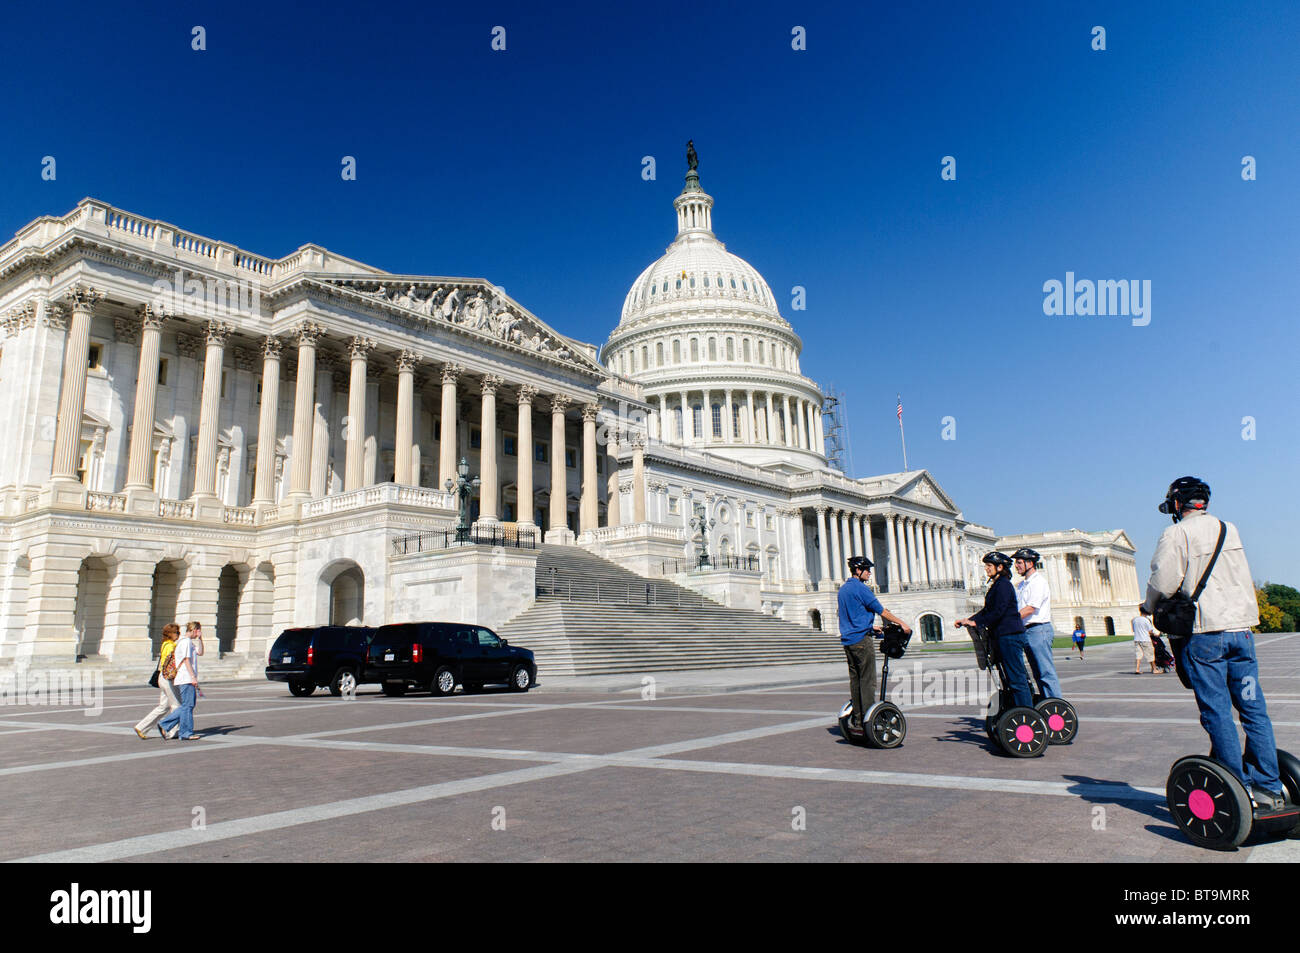 WASHINGTON DC, USA - A group of tourists on Segways in the piazza outside the US Capitol Building in Washington DC Stock Photo